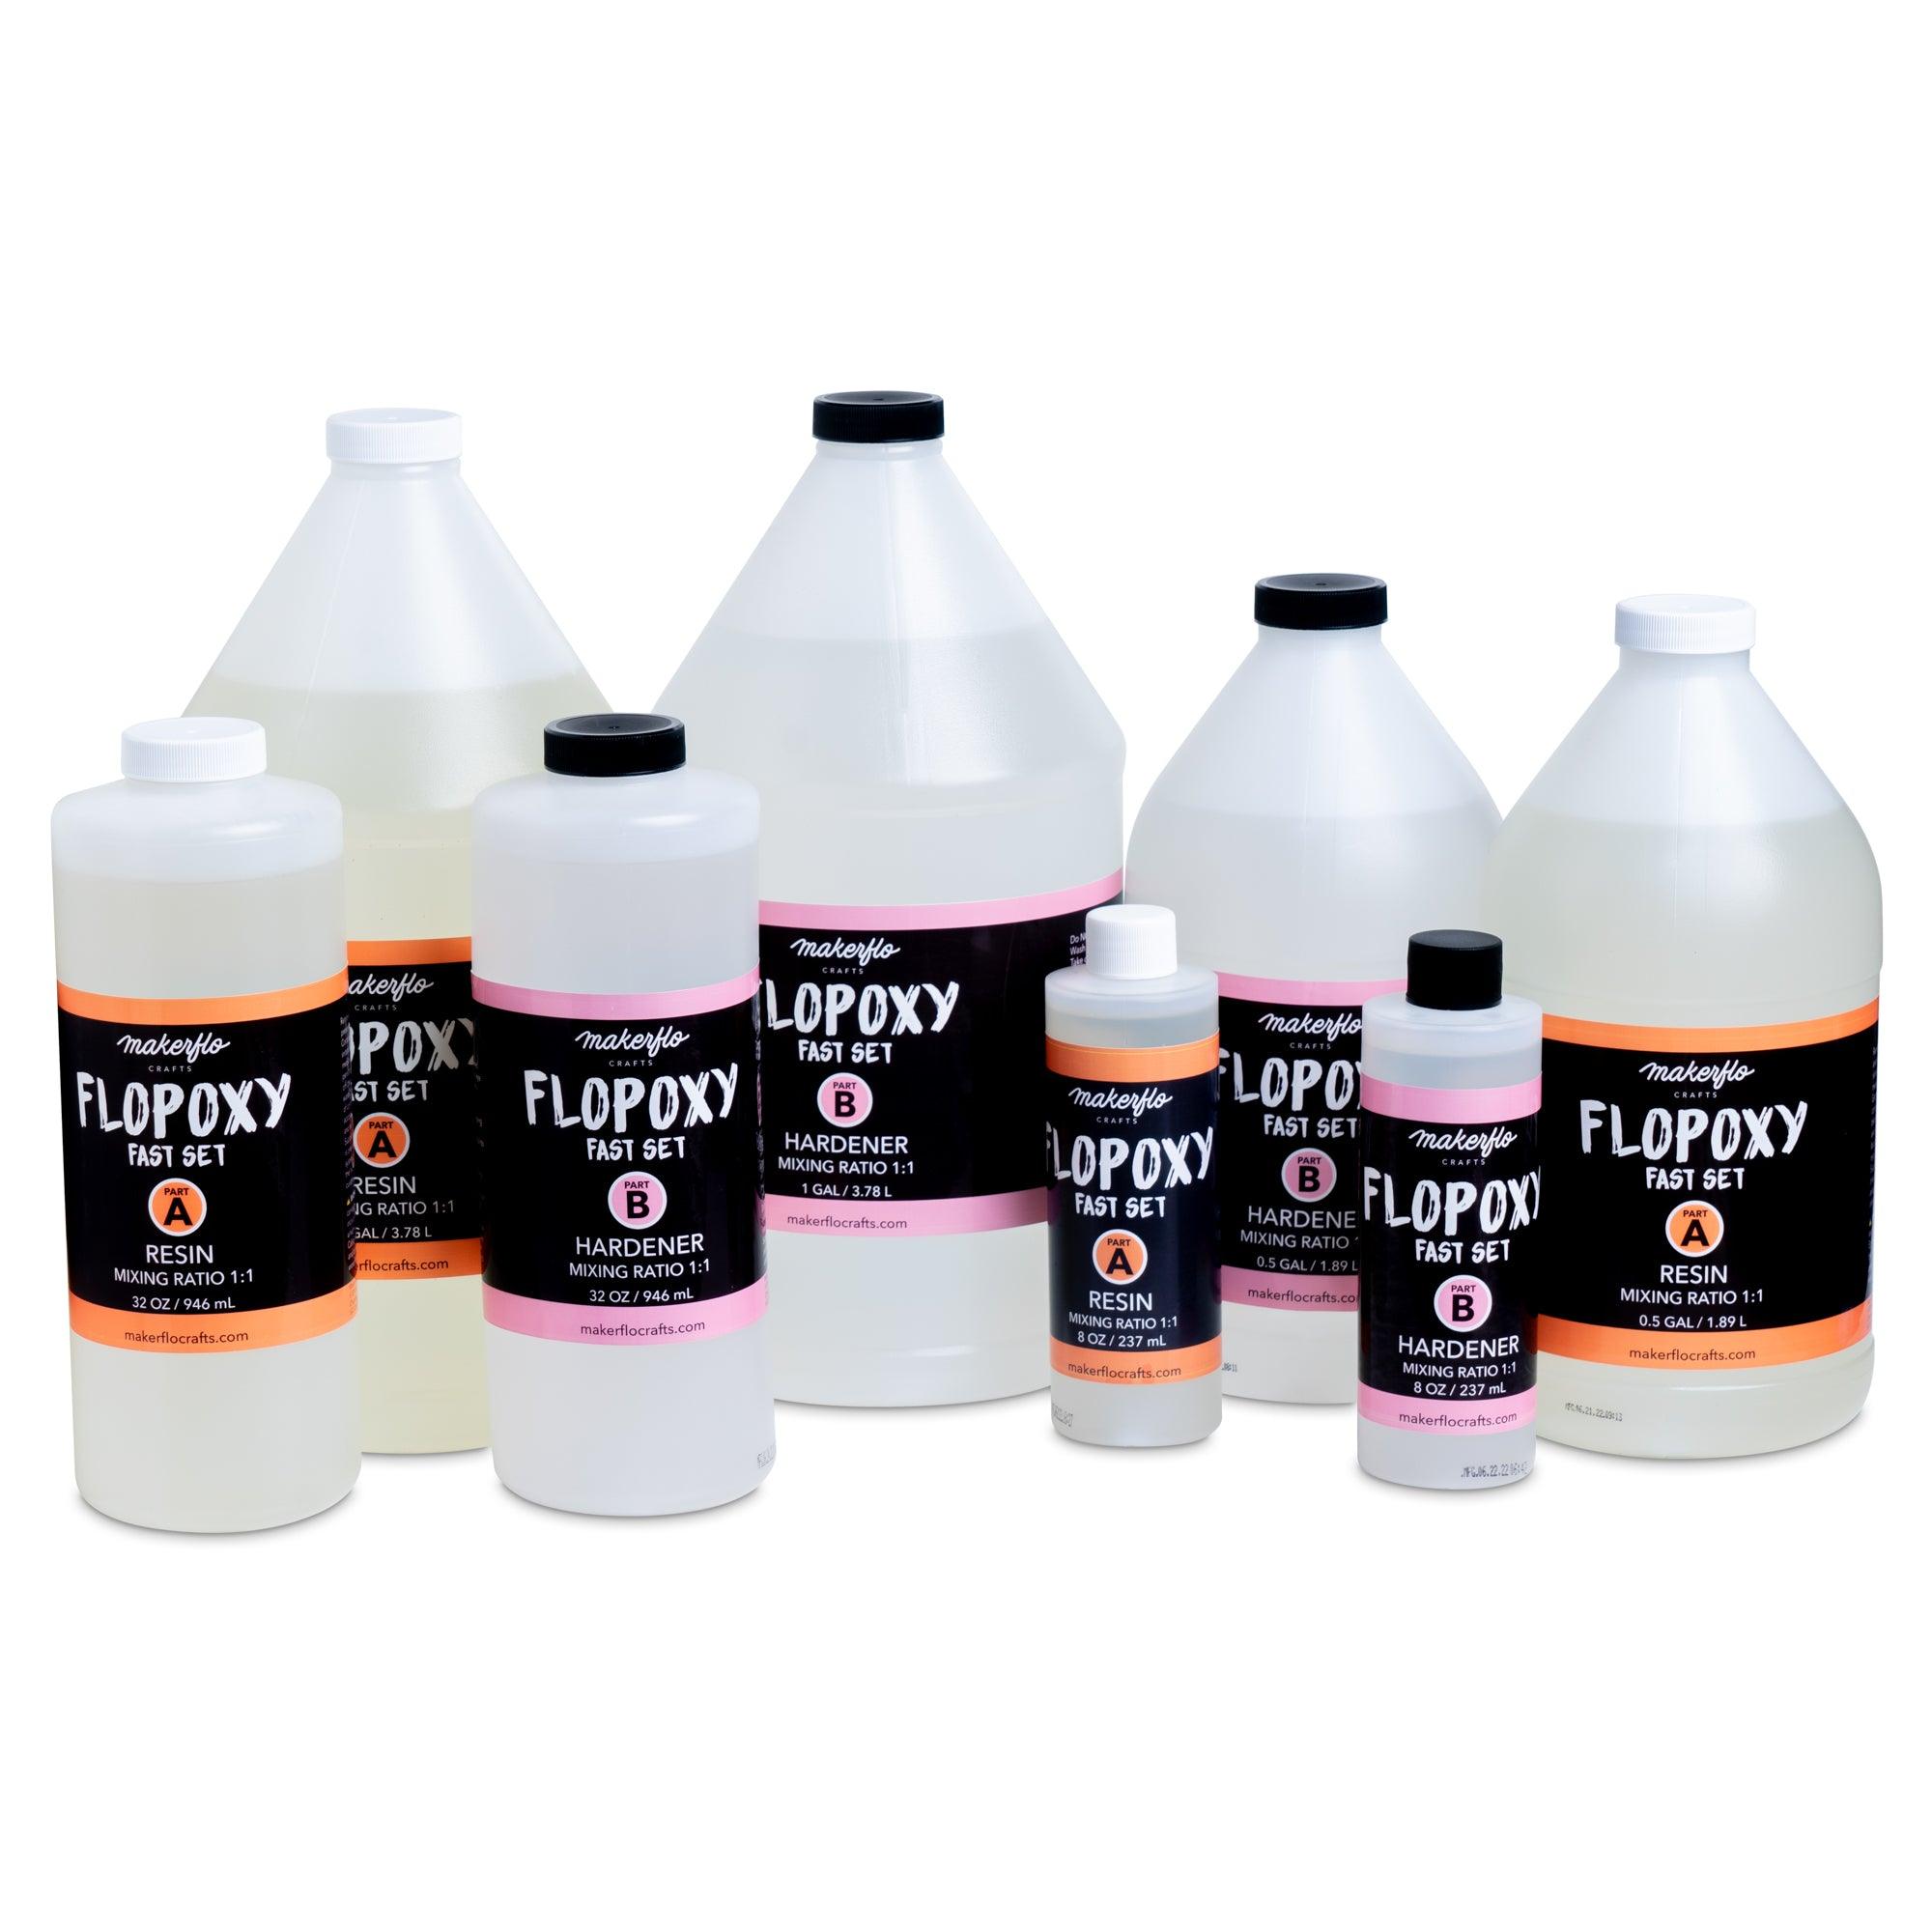 Poxyflow Rapido Fast Cure Epoxy Resin Kit 1.5 Kg - Pack of 12